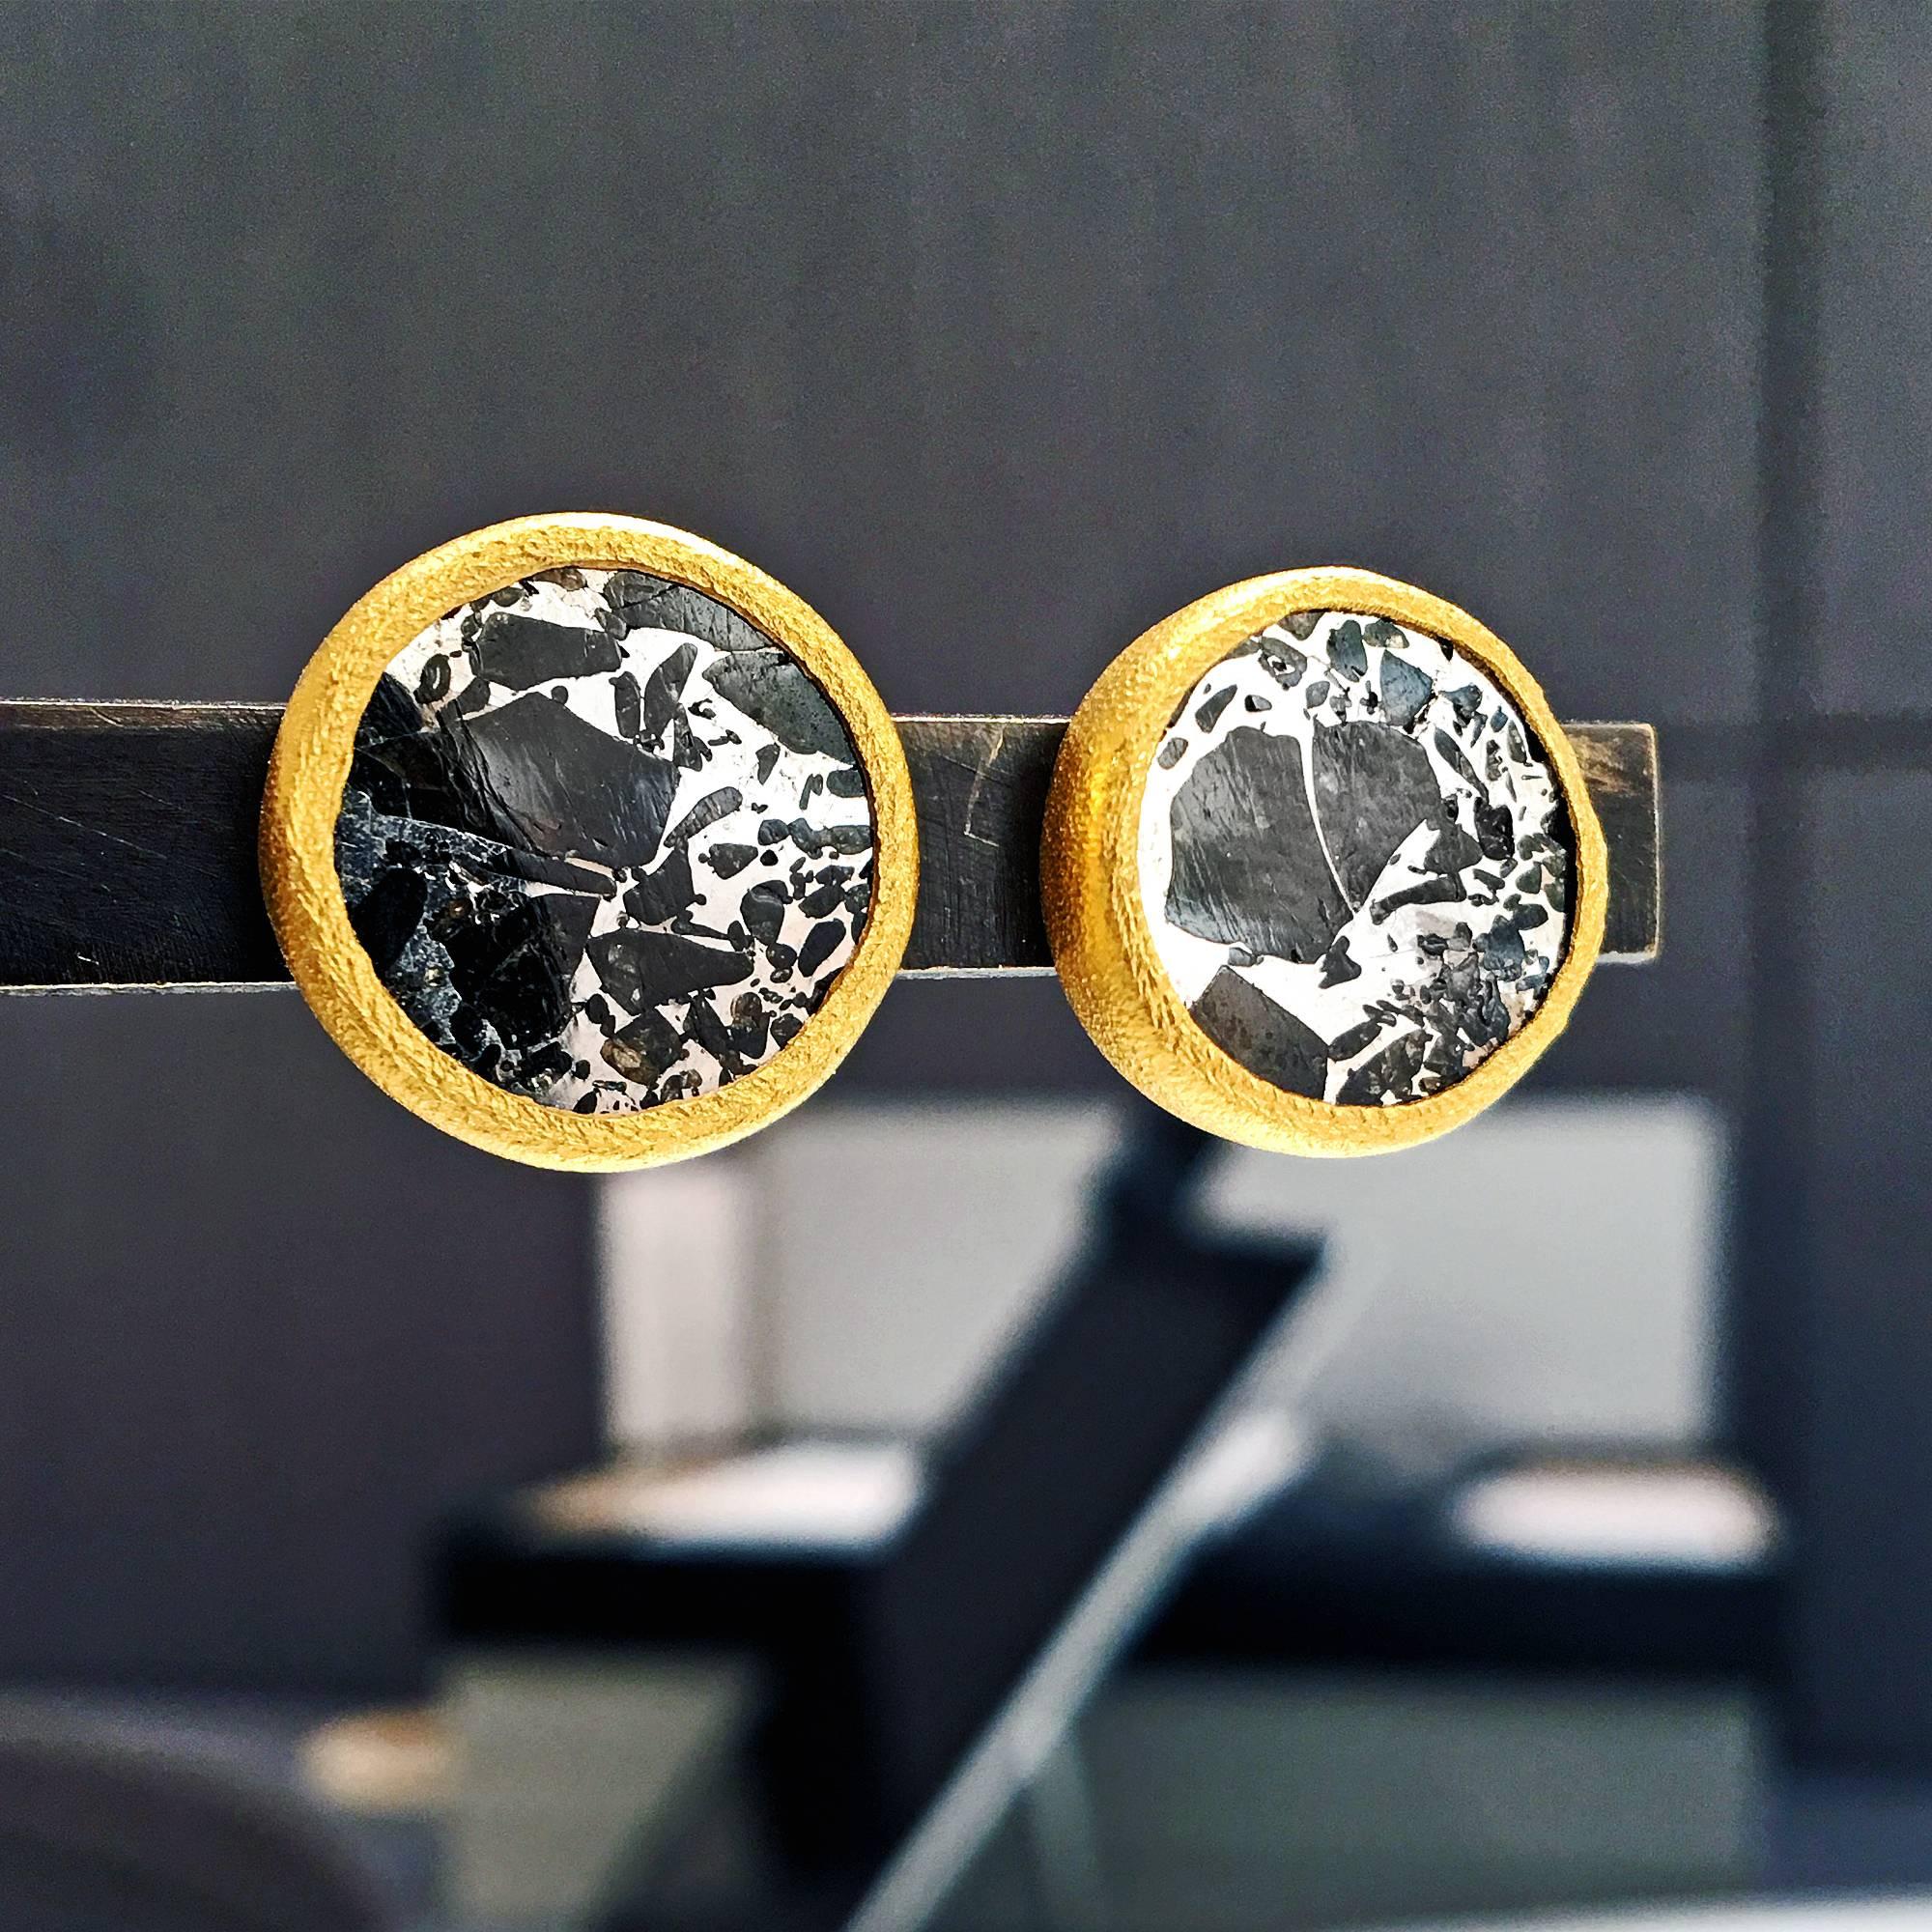 One of a Kind Stud Earrings handcrafted by jewelry artist Devta Doolan in beautifully-finished 22k yellow gold showcasing a pair of round meteorite coins with an incredible mirrored quality. 18k yellow gold posts and backs. Stamped and hallmarked